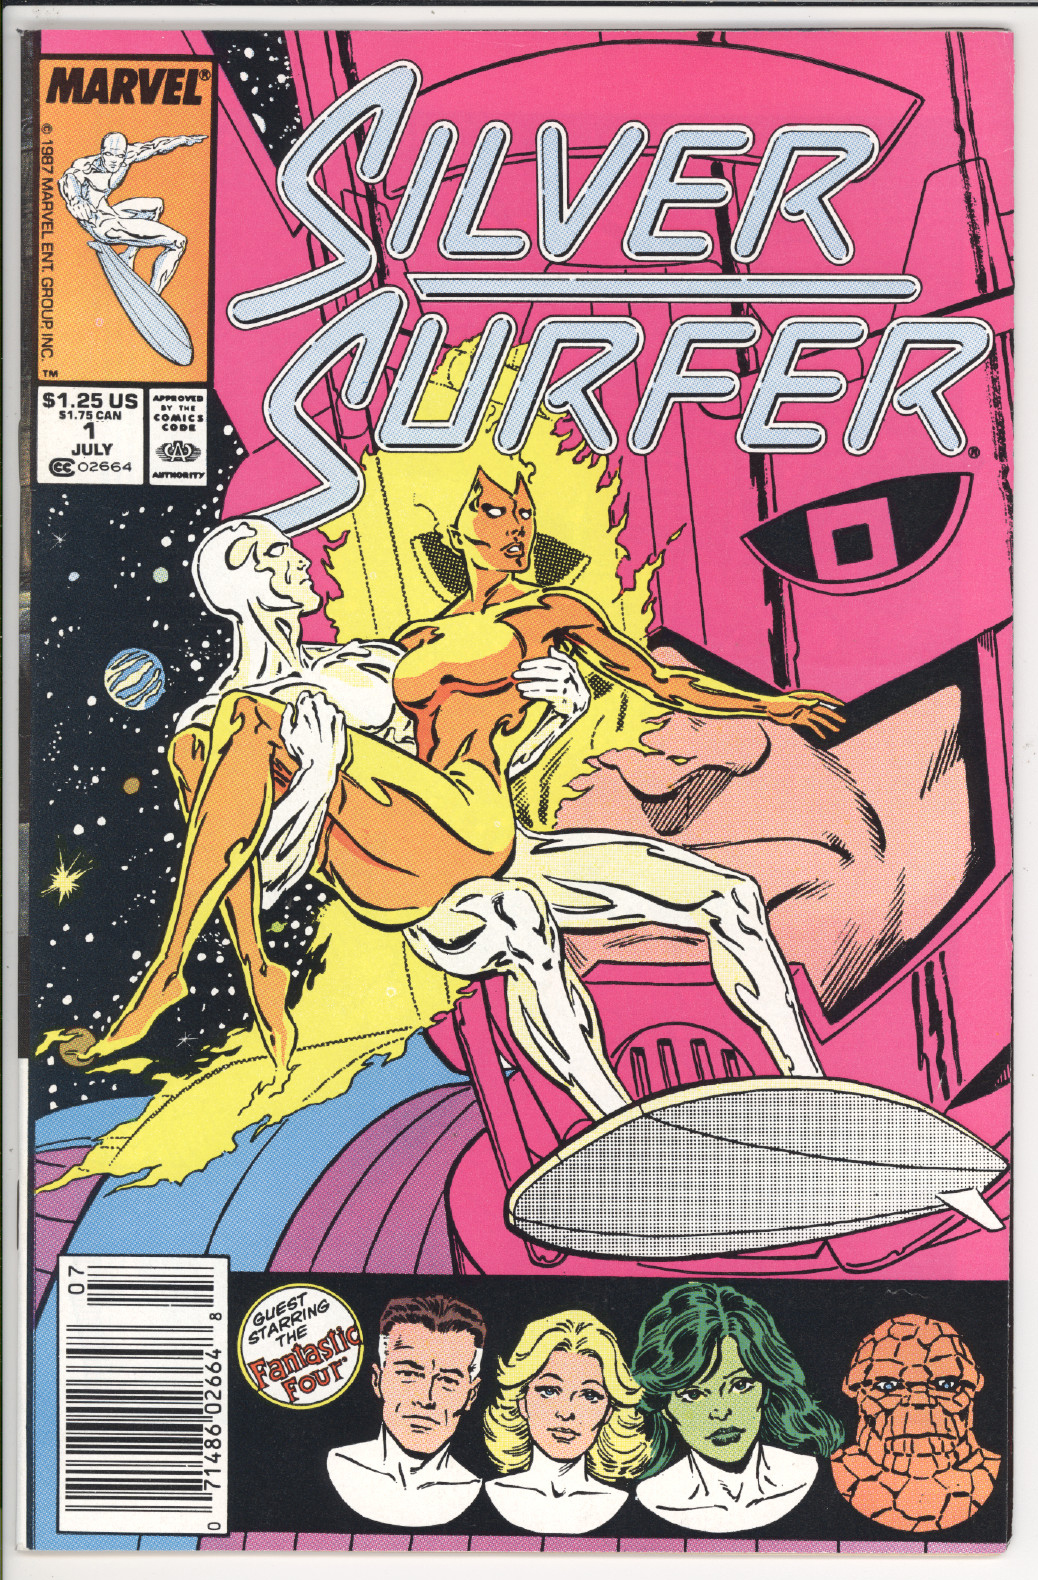 Silver Surfer #1 front